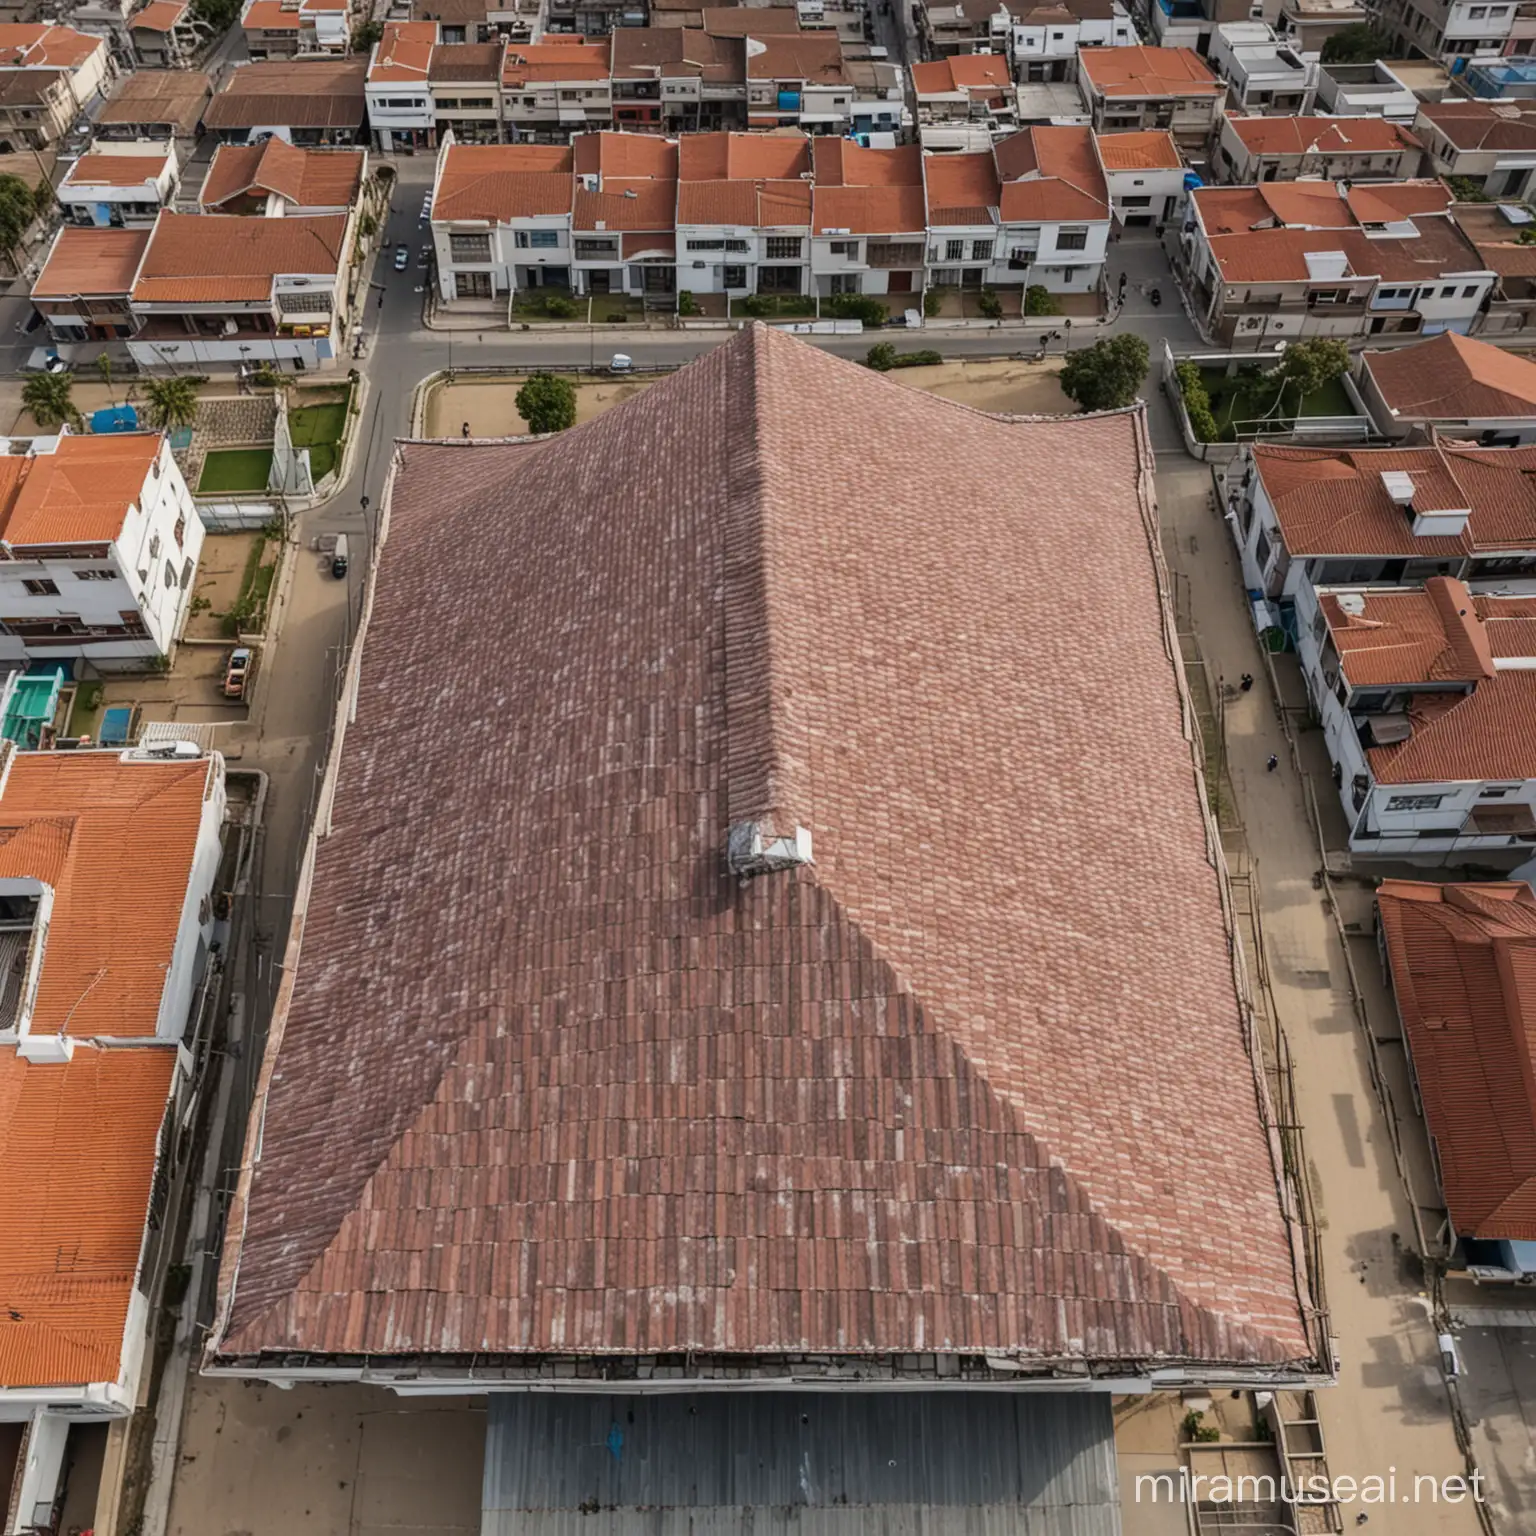 Aerial View of Lima Peru Closeup of Modest House Roof in Urban Setting